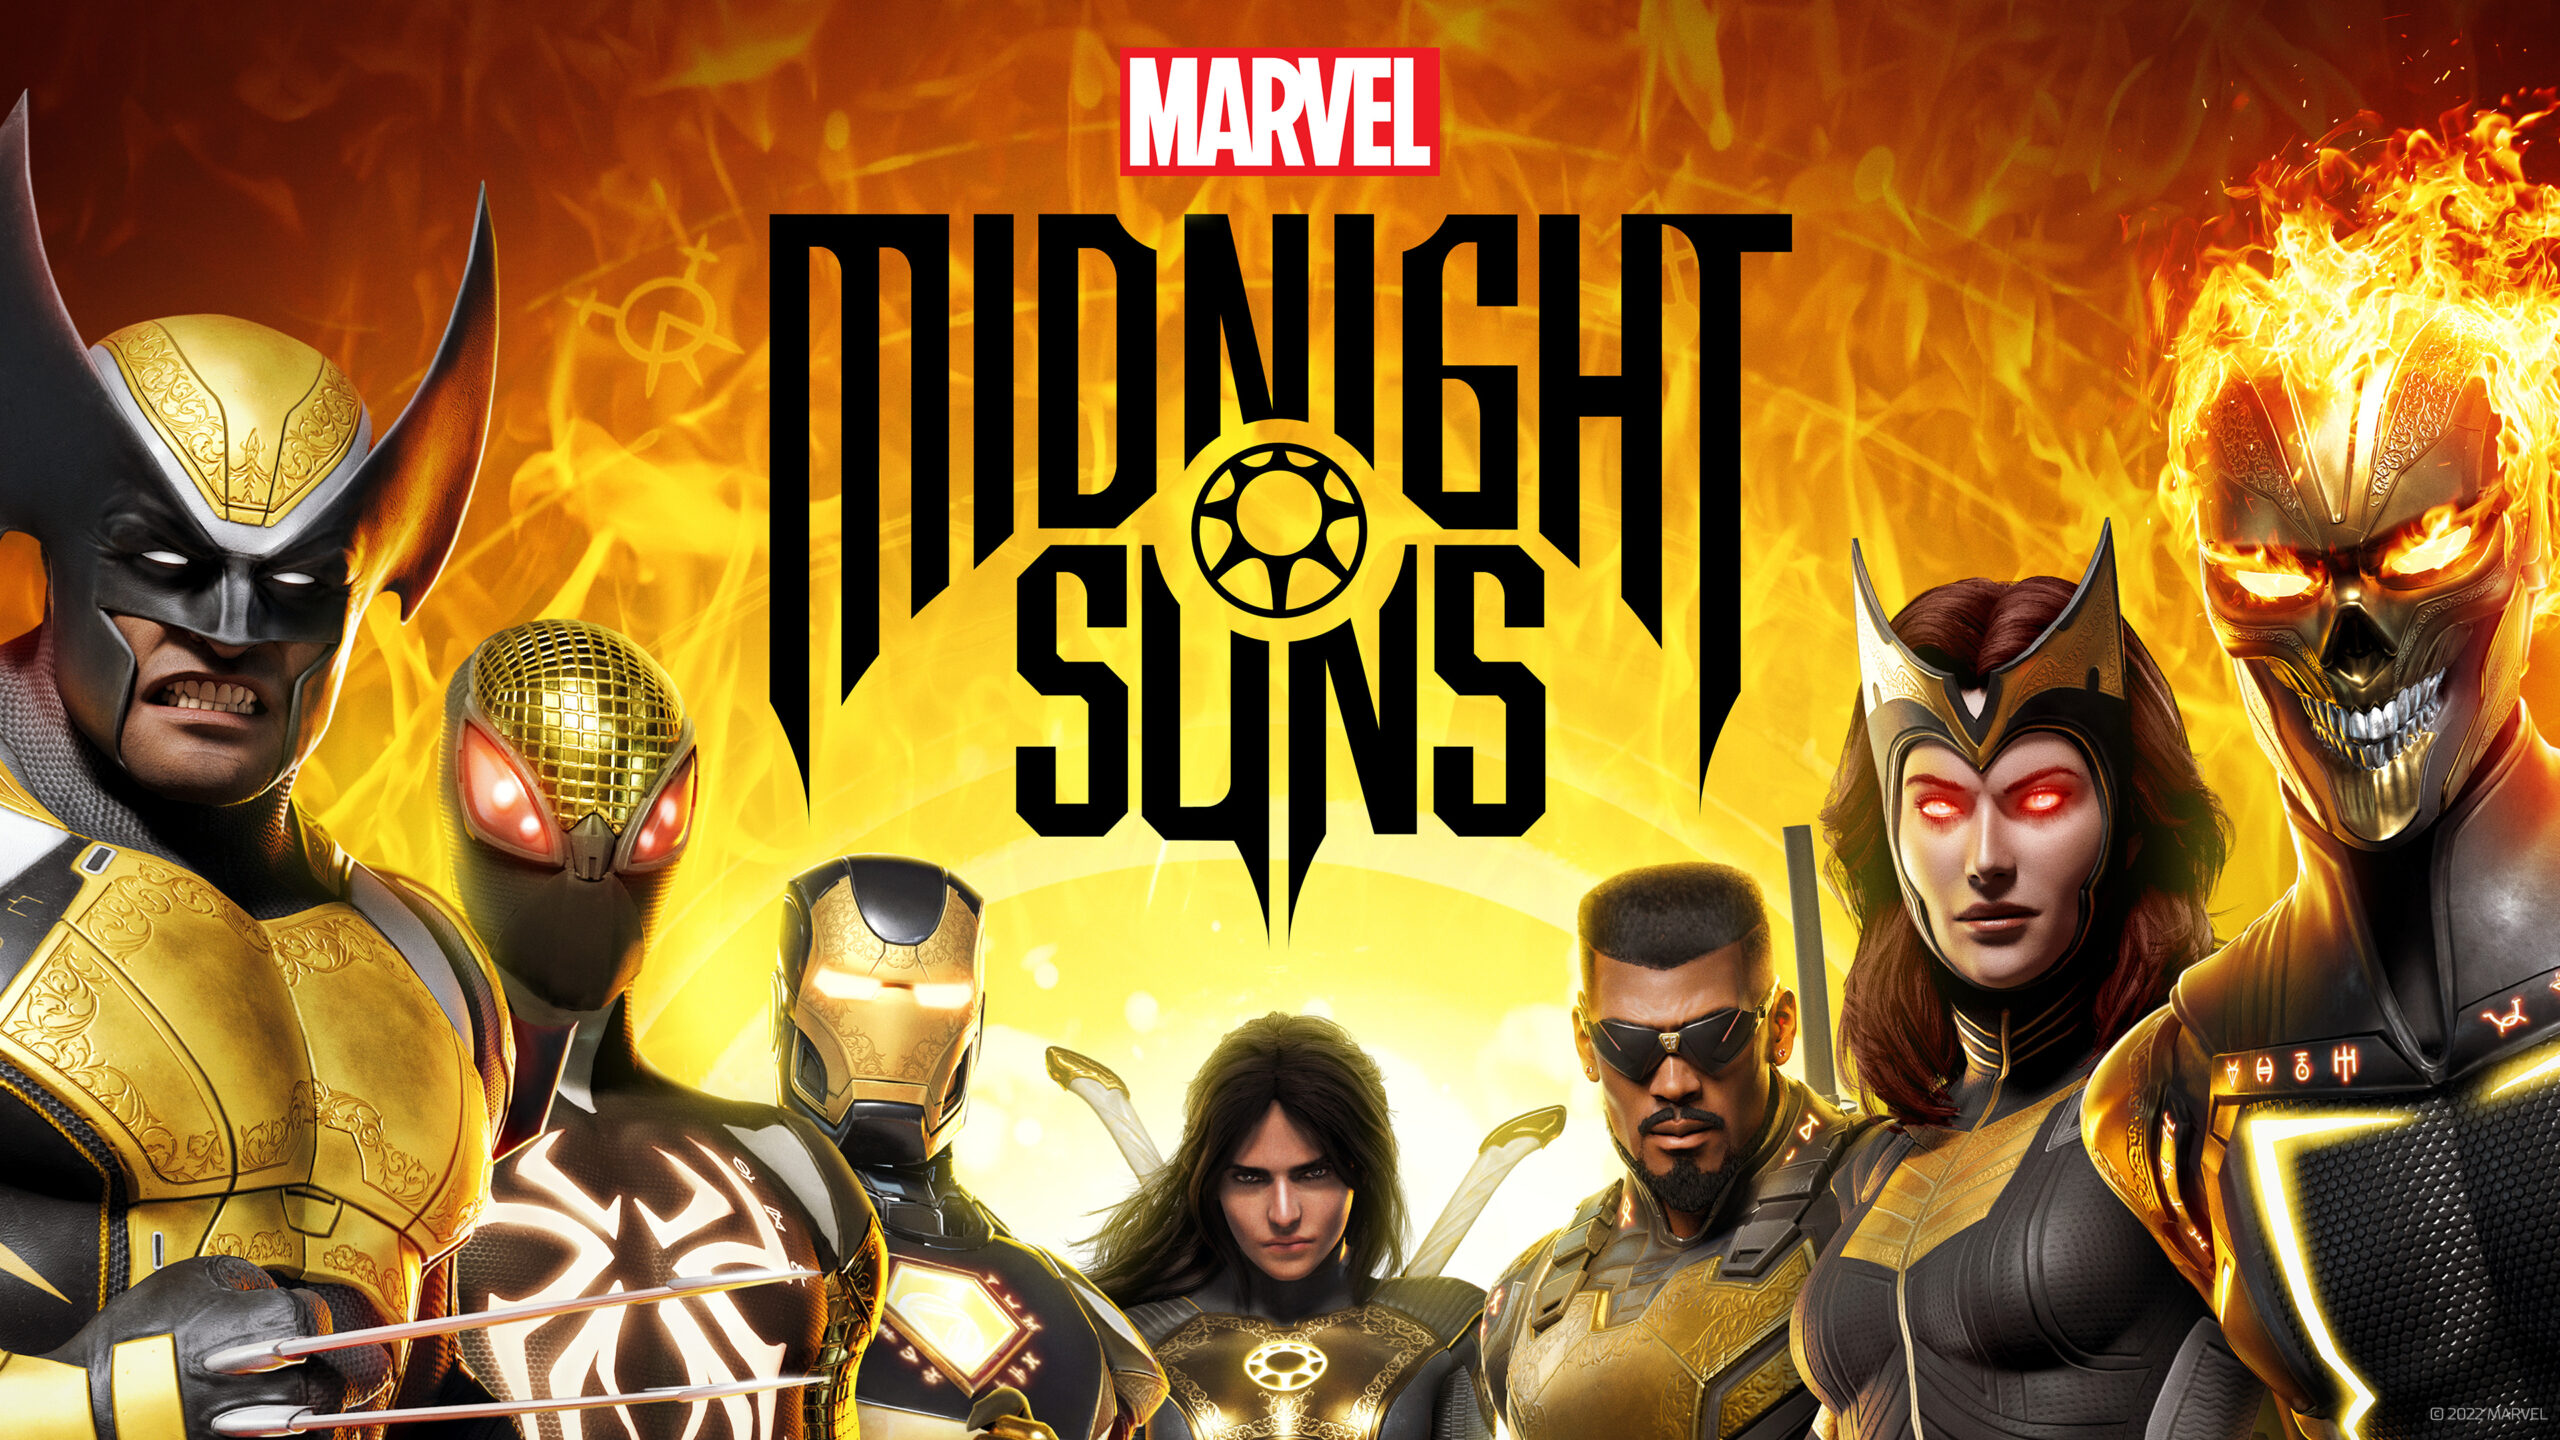 Why Marvel's Midnight Suns might be getting a release date soon